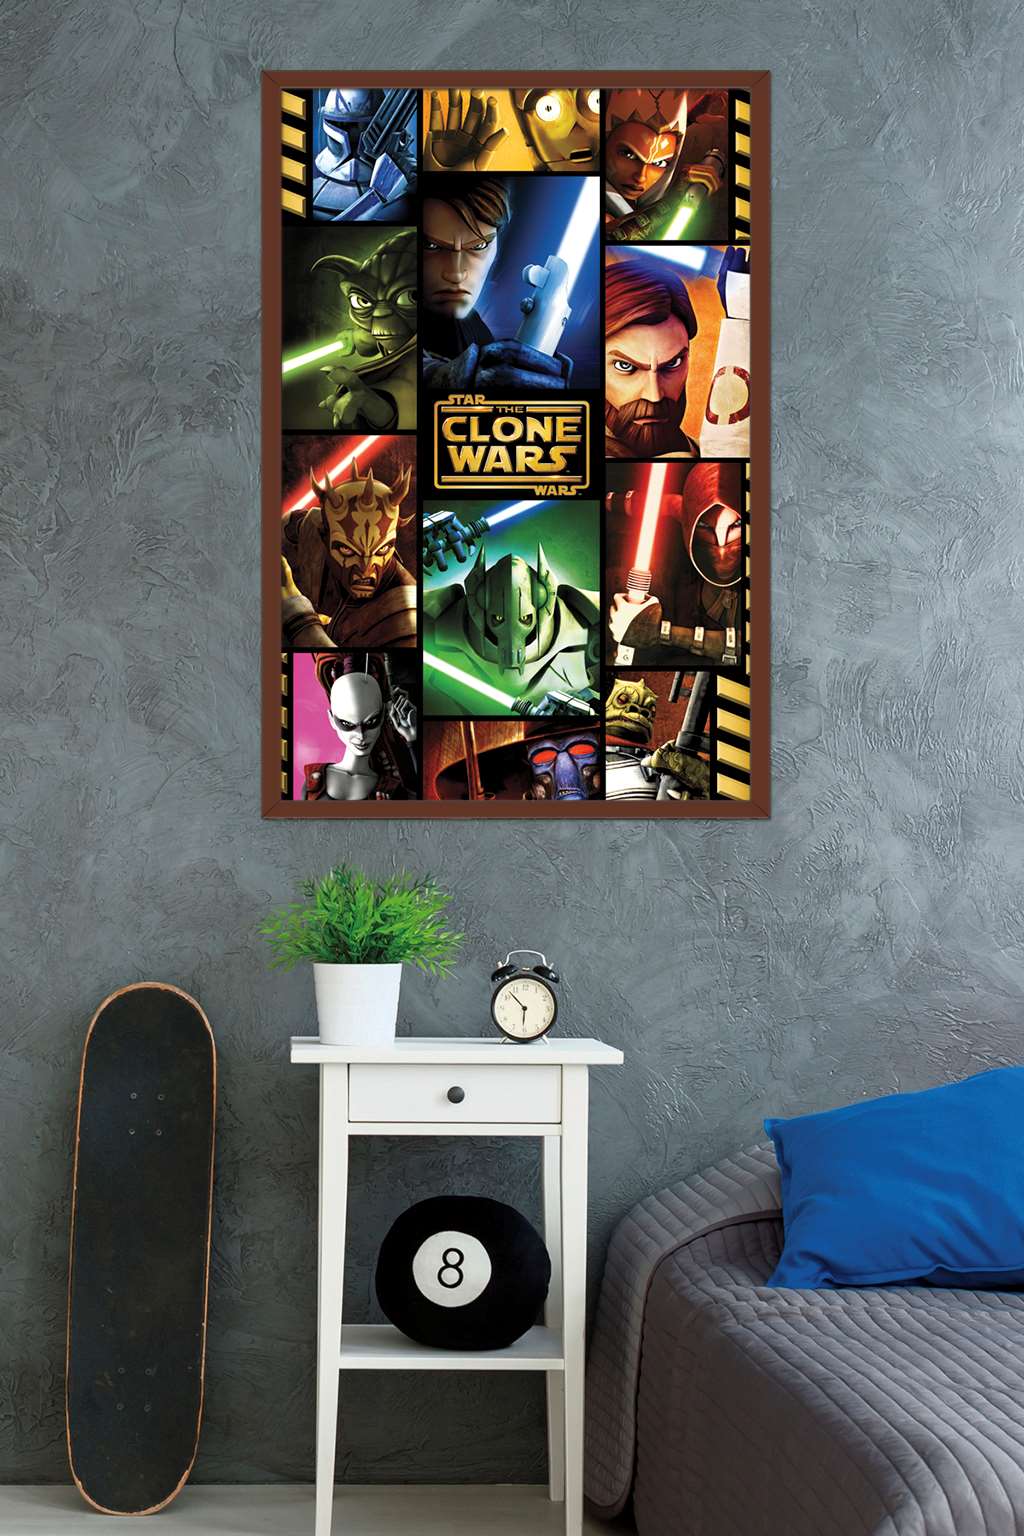 Star Wars: The Clone Wars - Grid Wall Poster, 22.375" x 34", Framed - image 2 of 2